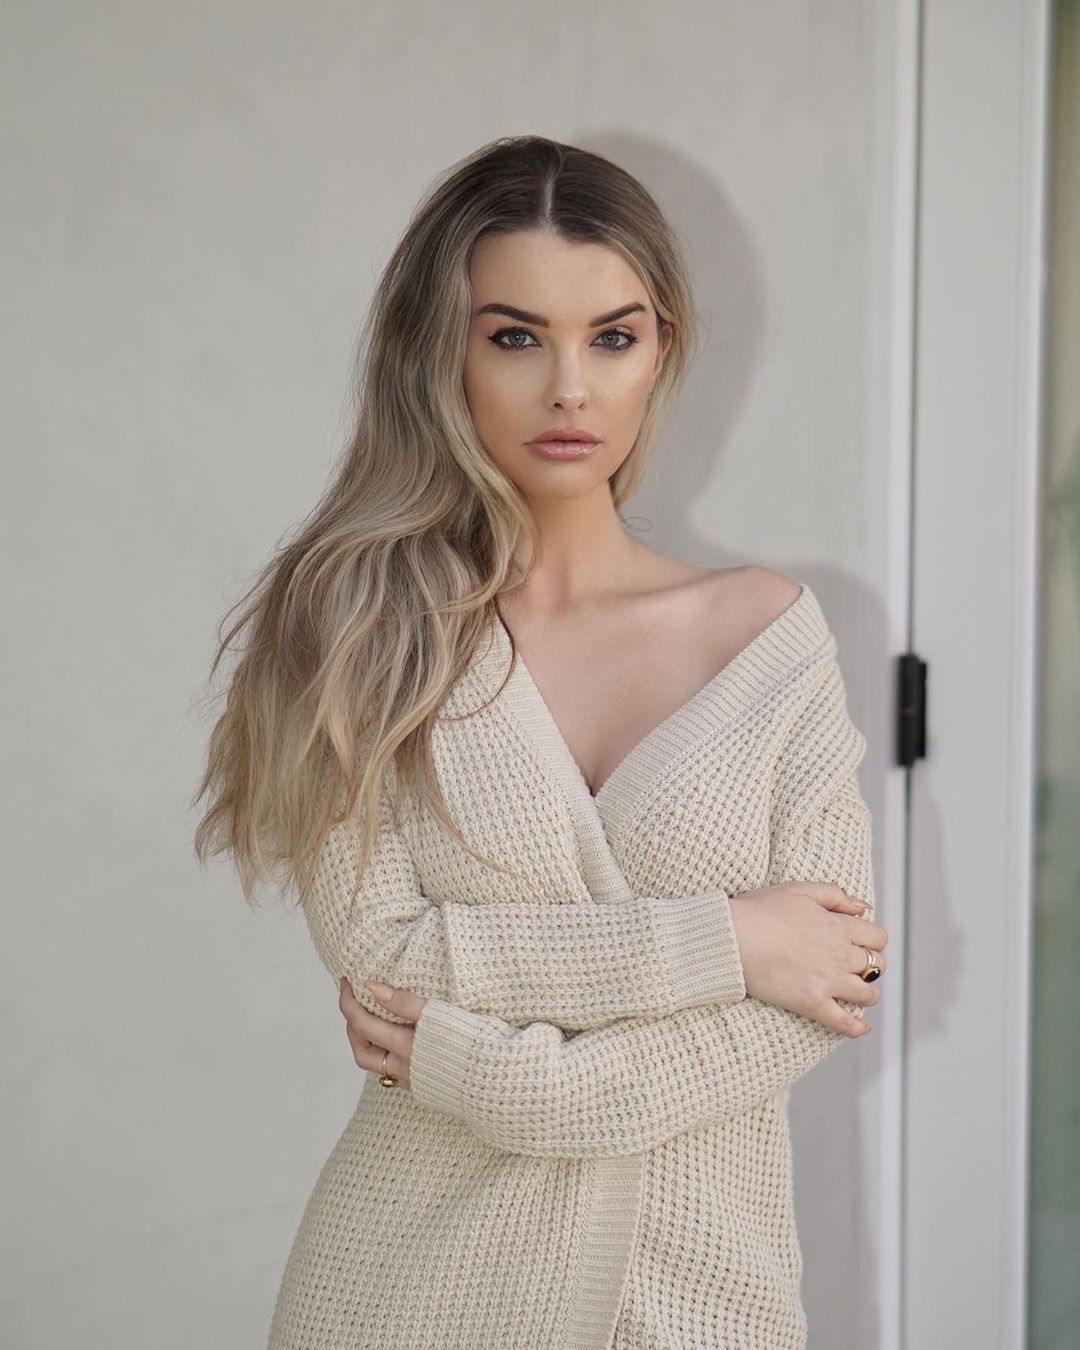 Emily Sears, Age, Height. Fitness Models Biography